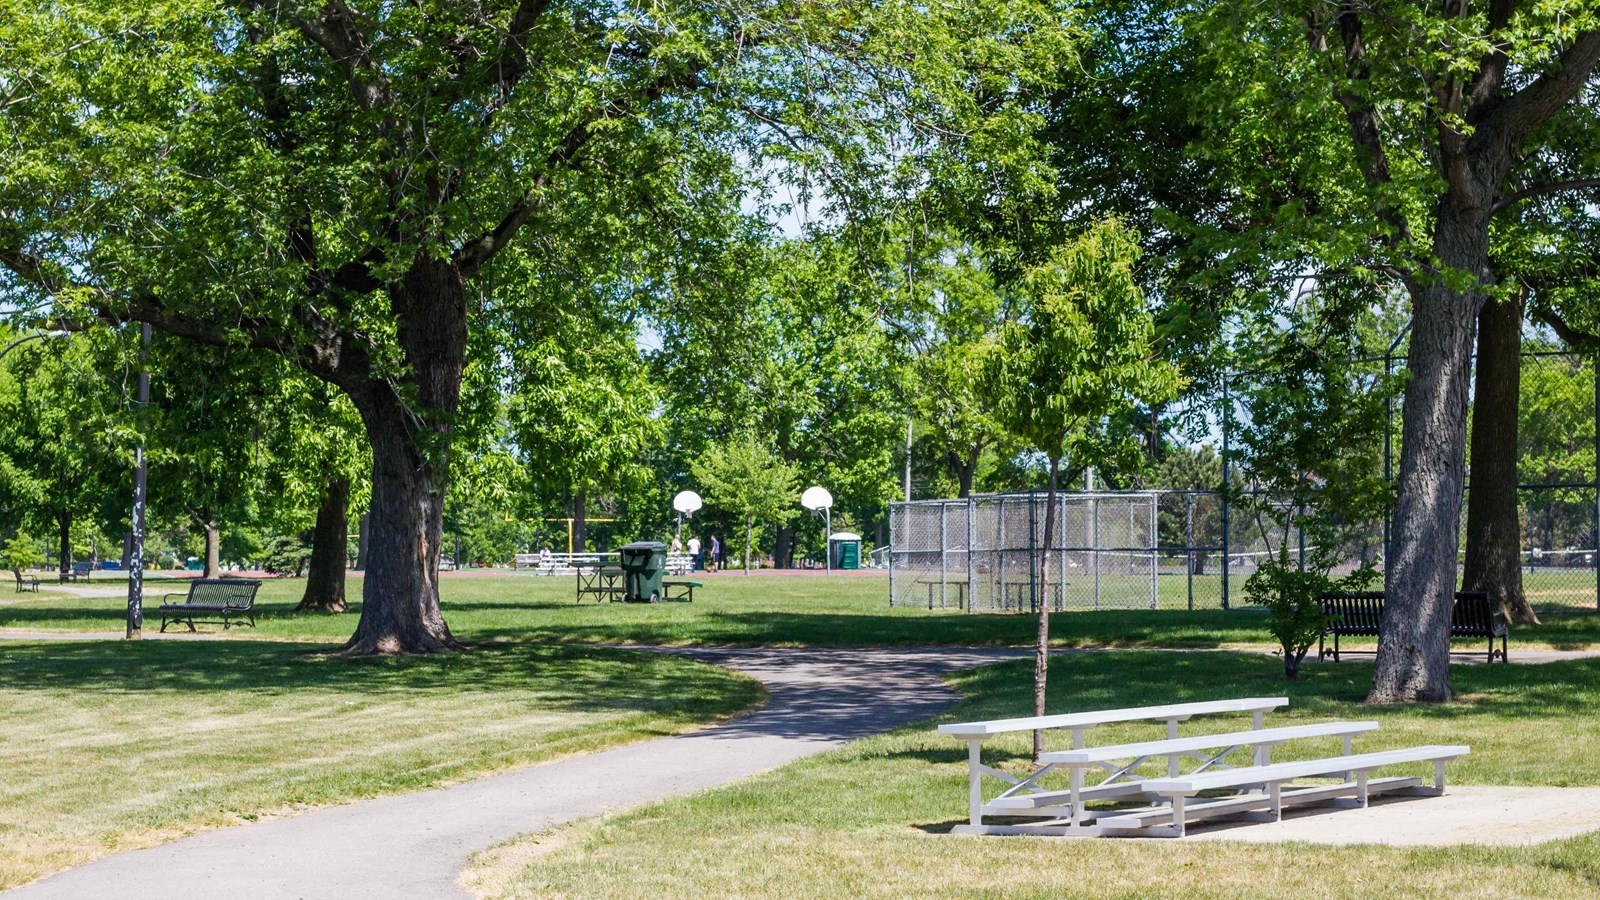 Trees and pathway at Riverside Park with athletic fields in the background